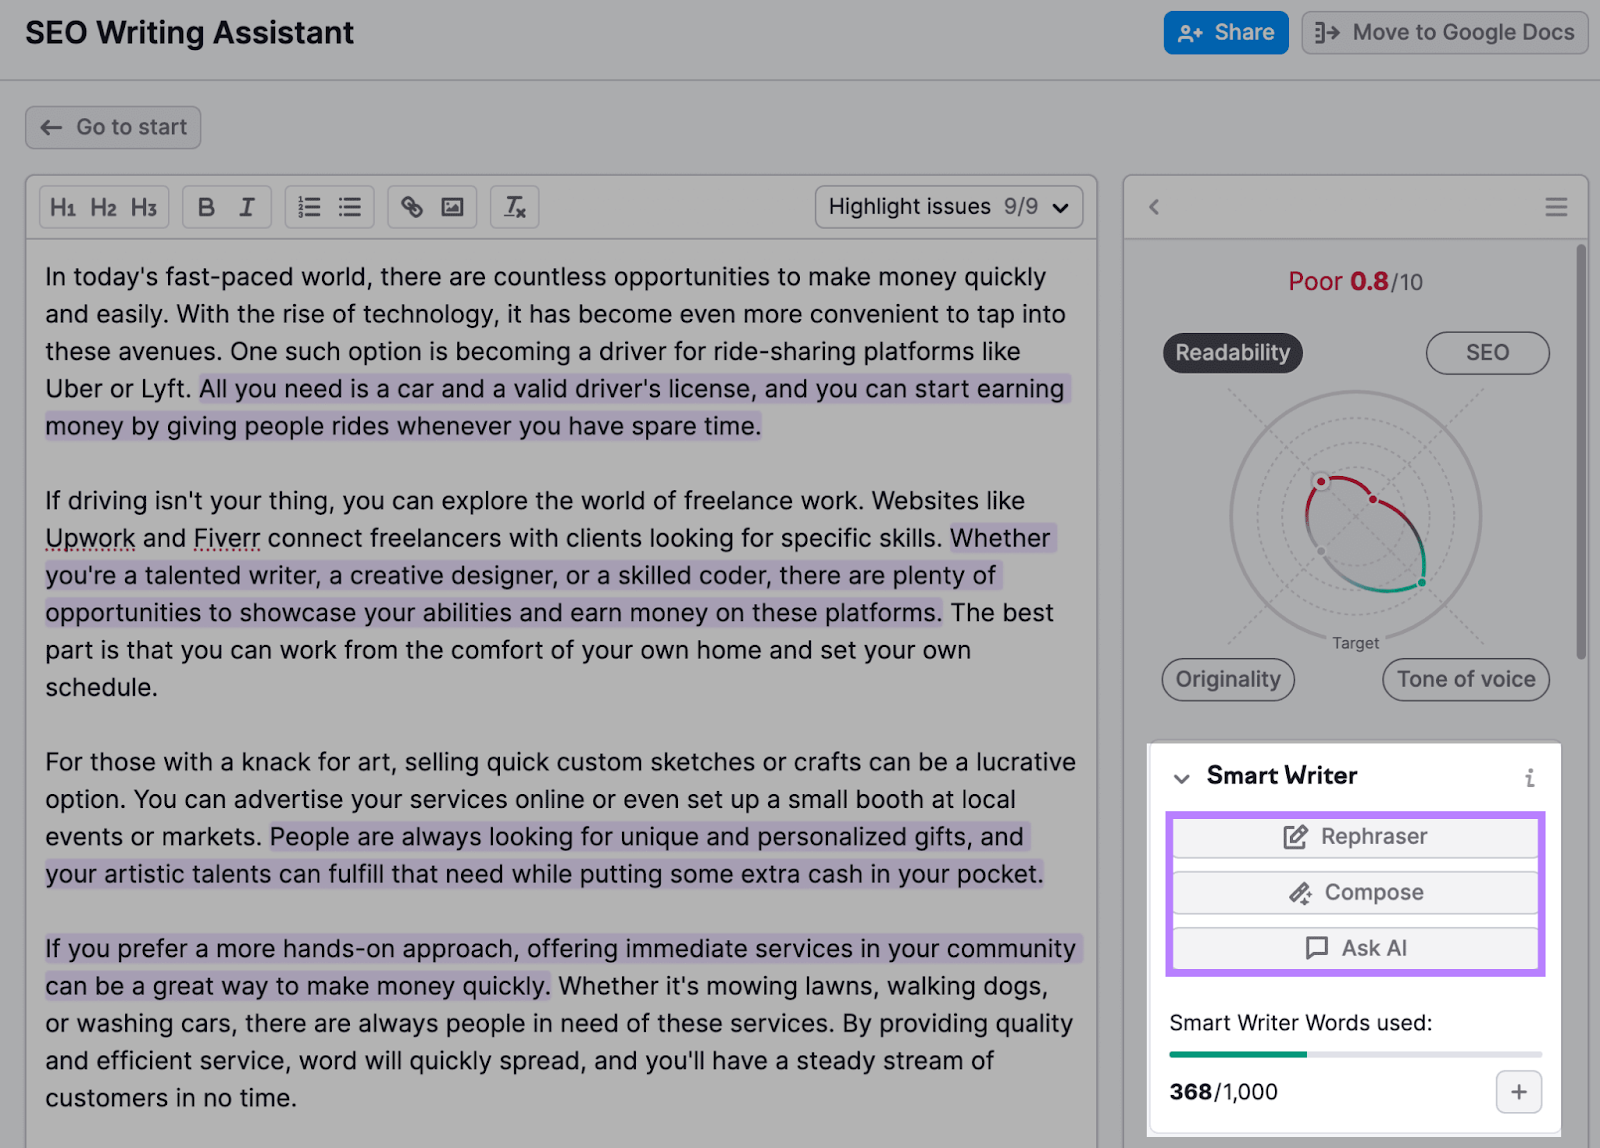 "Smart Writer" feature highlighted on the right side in SEO Writing Assistant editor